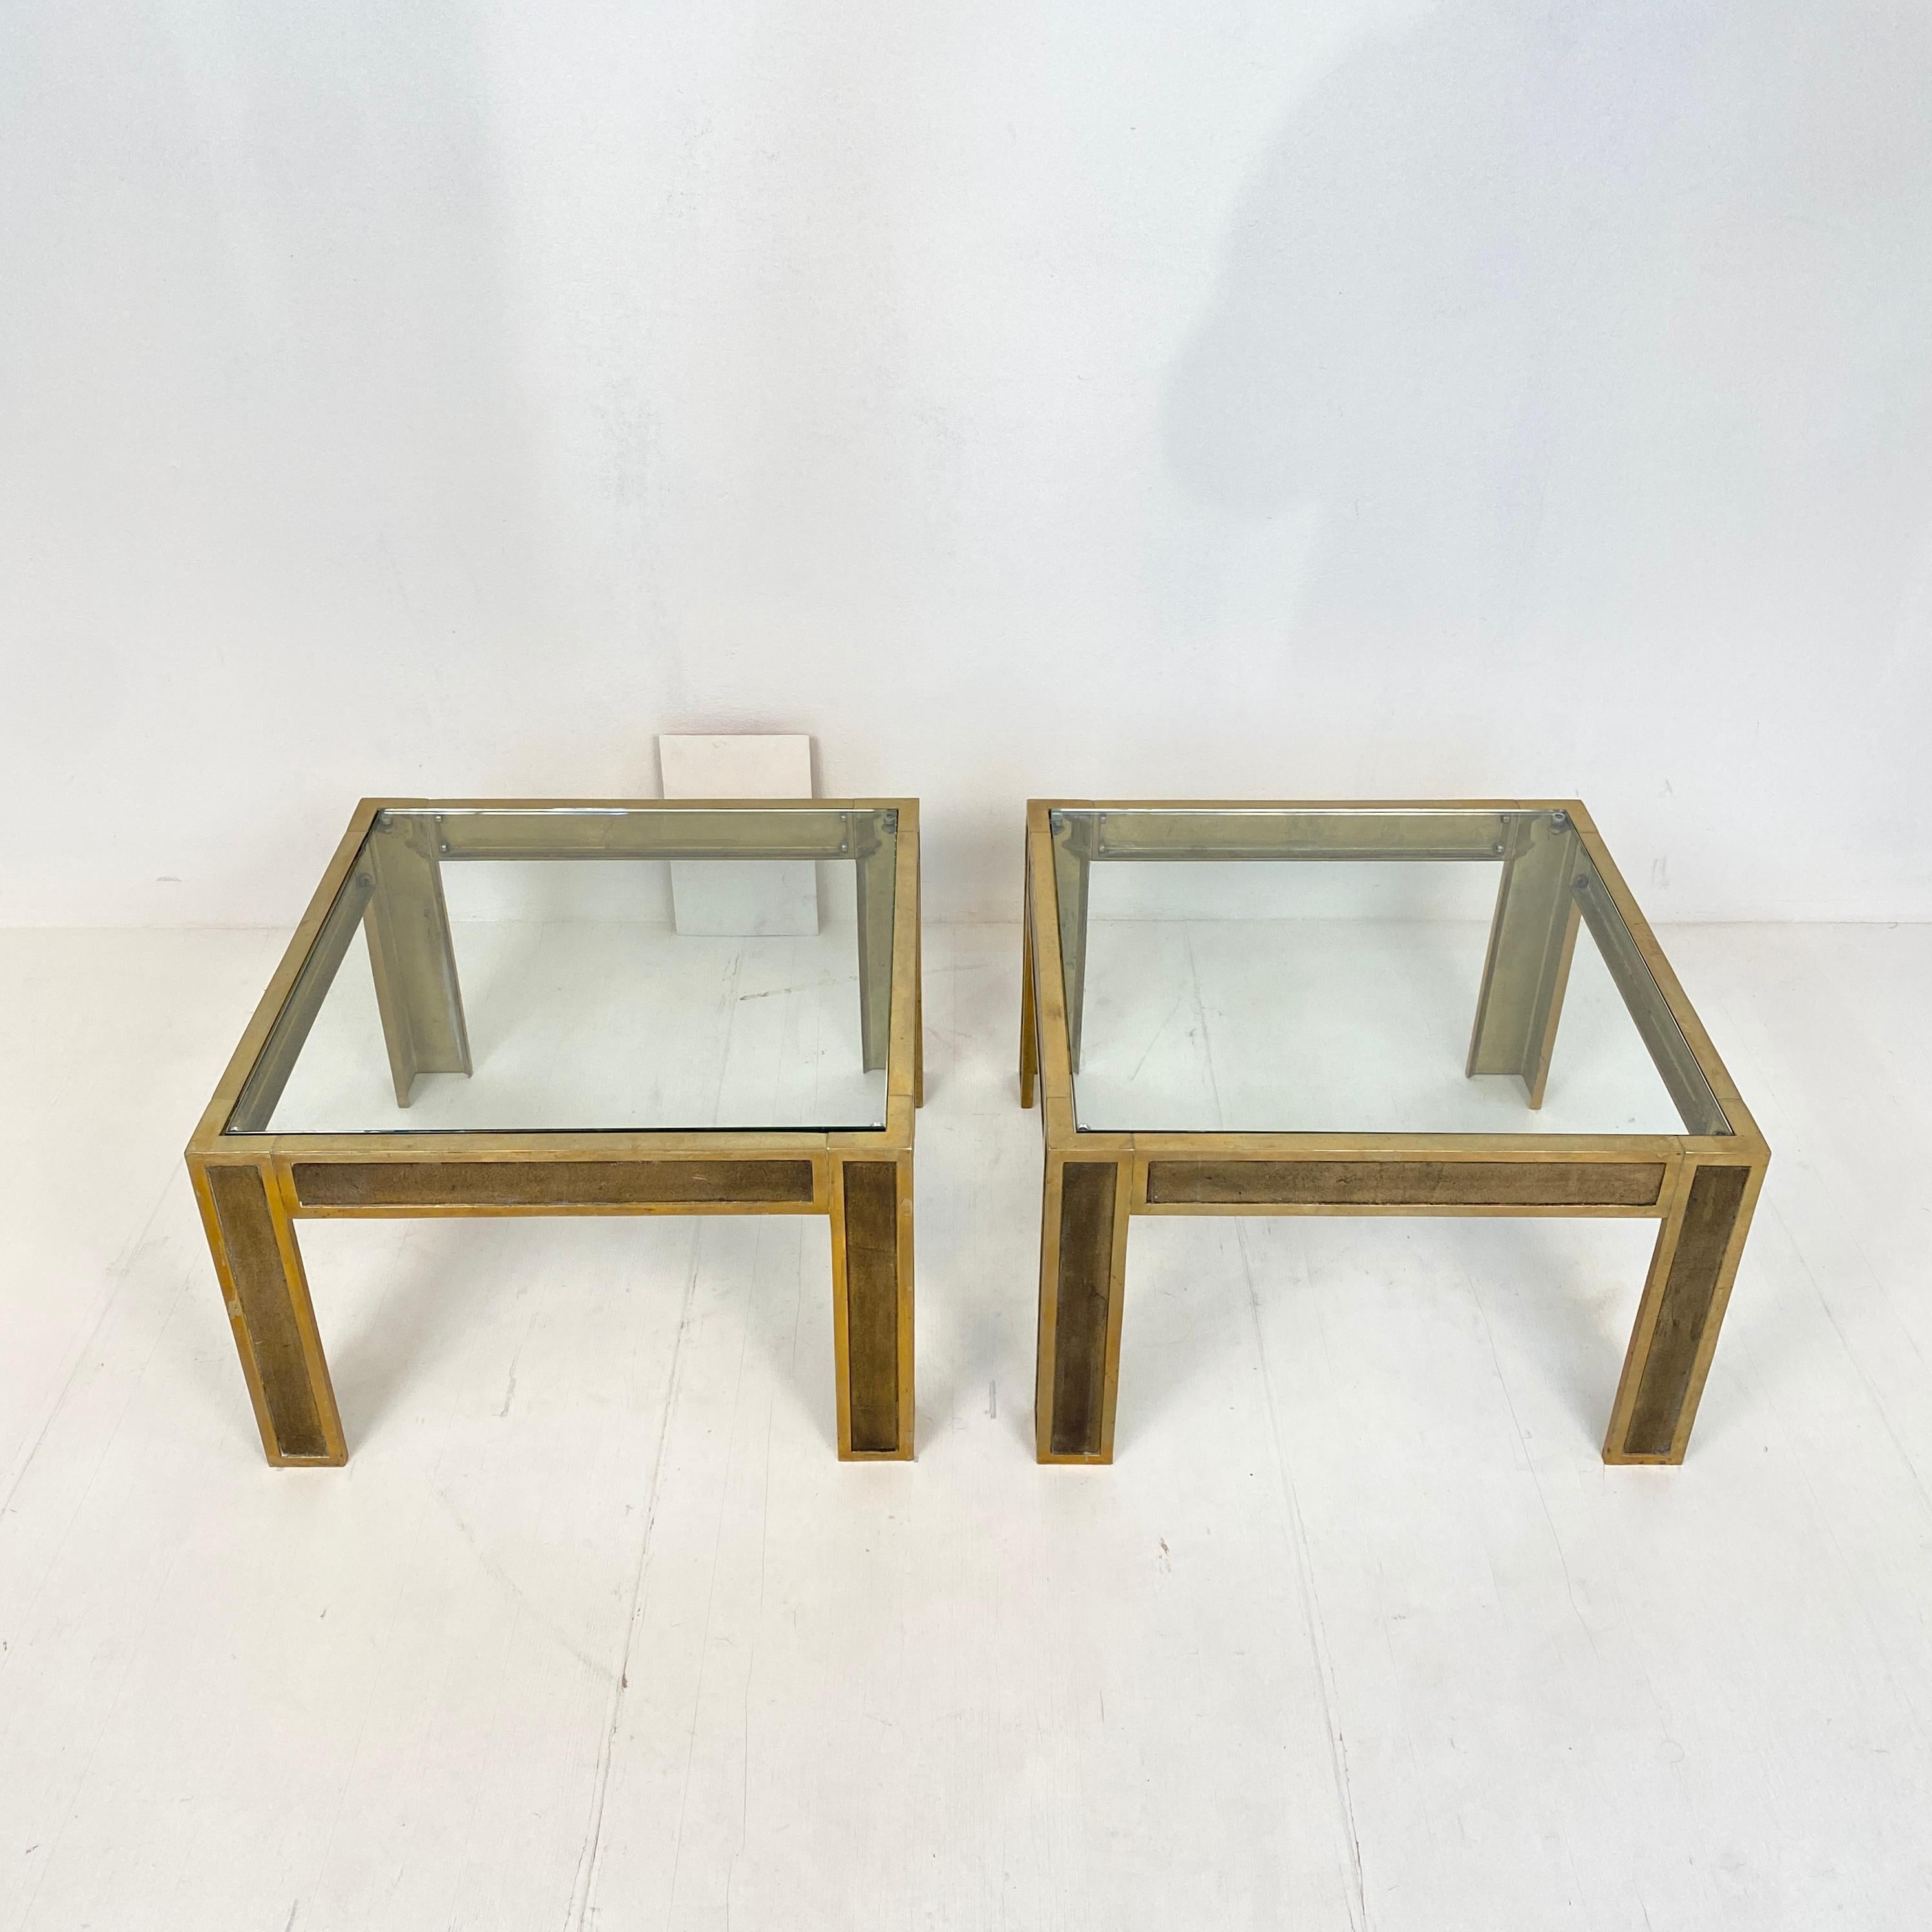 Late 20th Century Pair of Mid-Century Brass and Glass Sofa Tables or Coffee Tables by Ghyczy